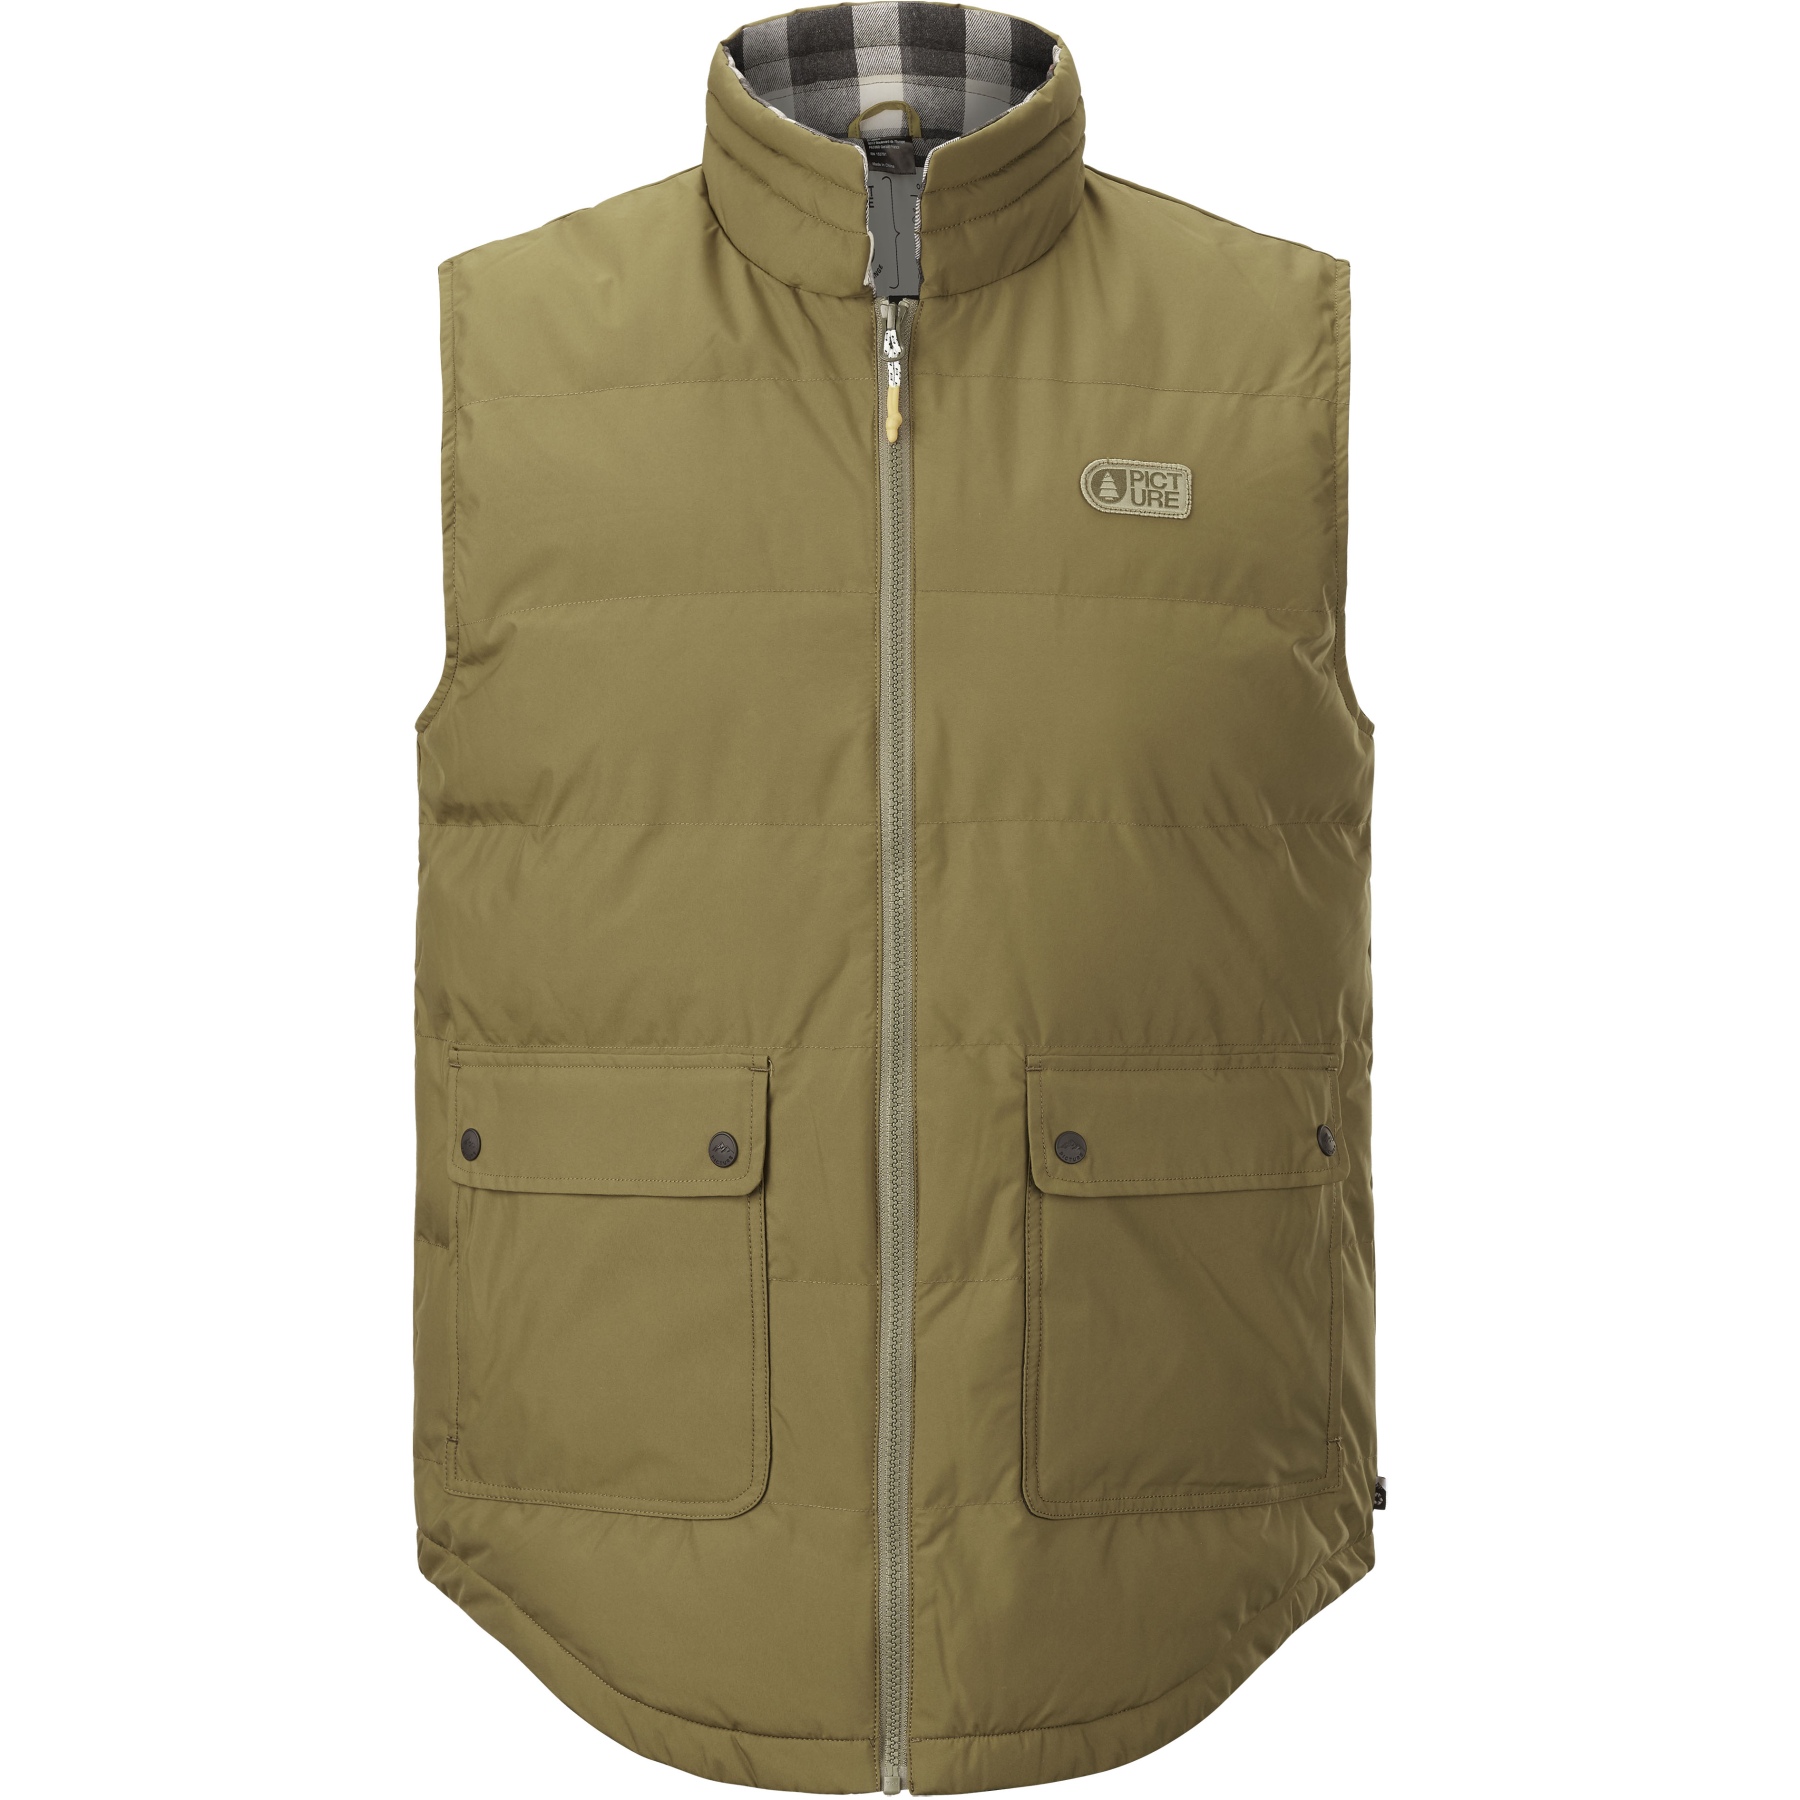 Productfoto van Picture Russello Vest - Army Green